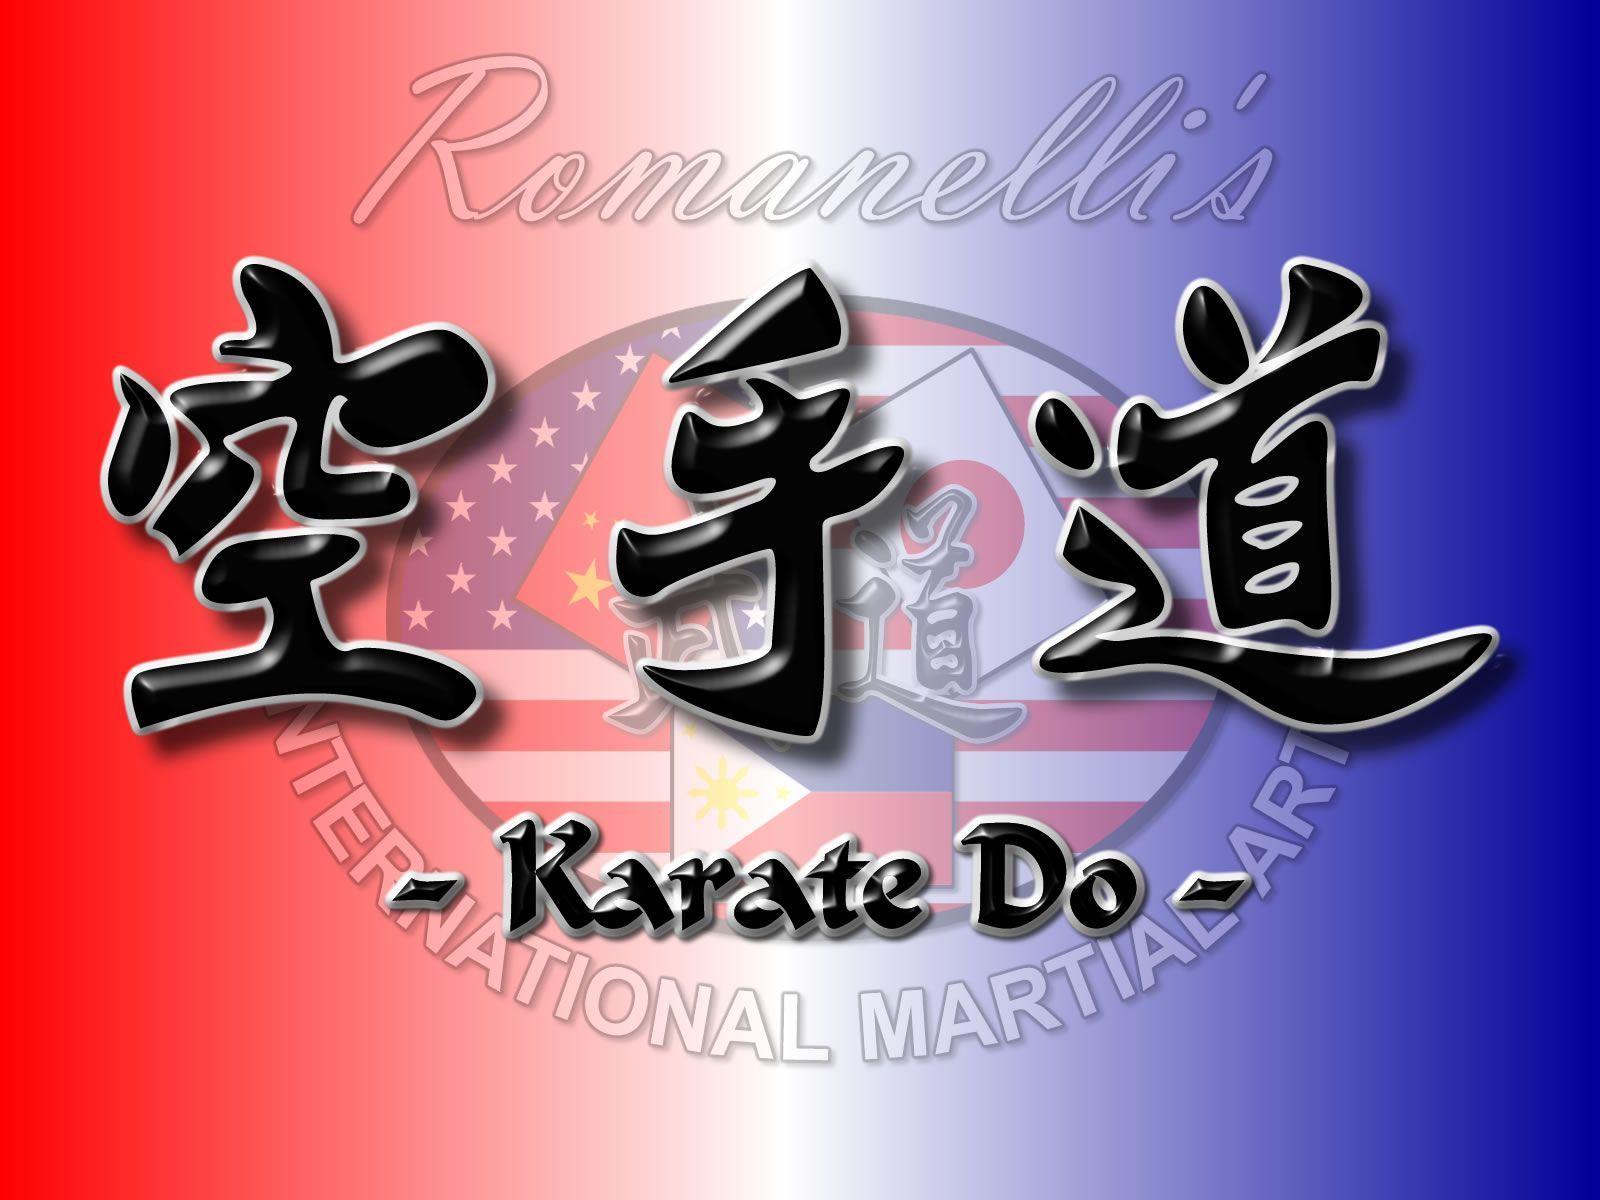 Welcome to Romanelli&;s International Martial Arts!!!